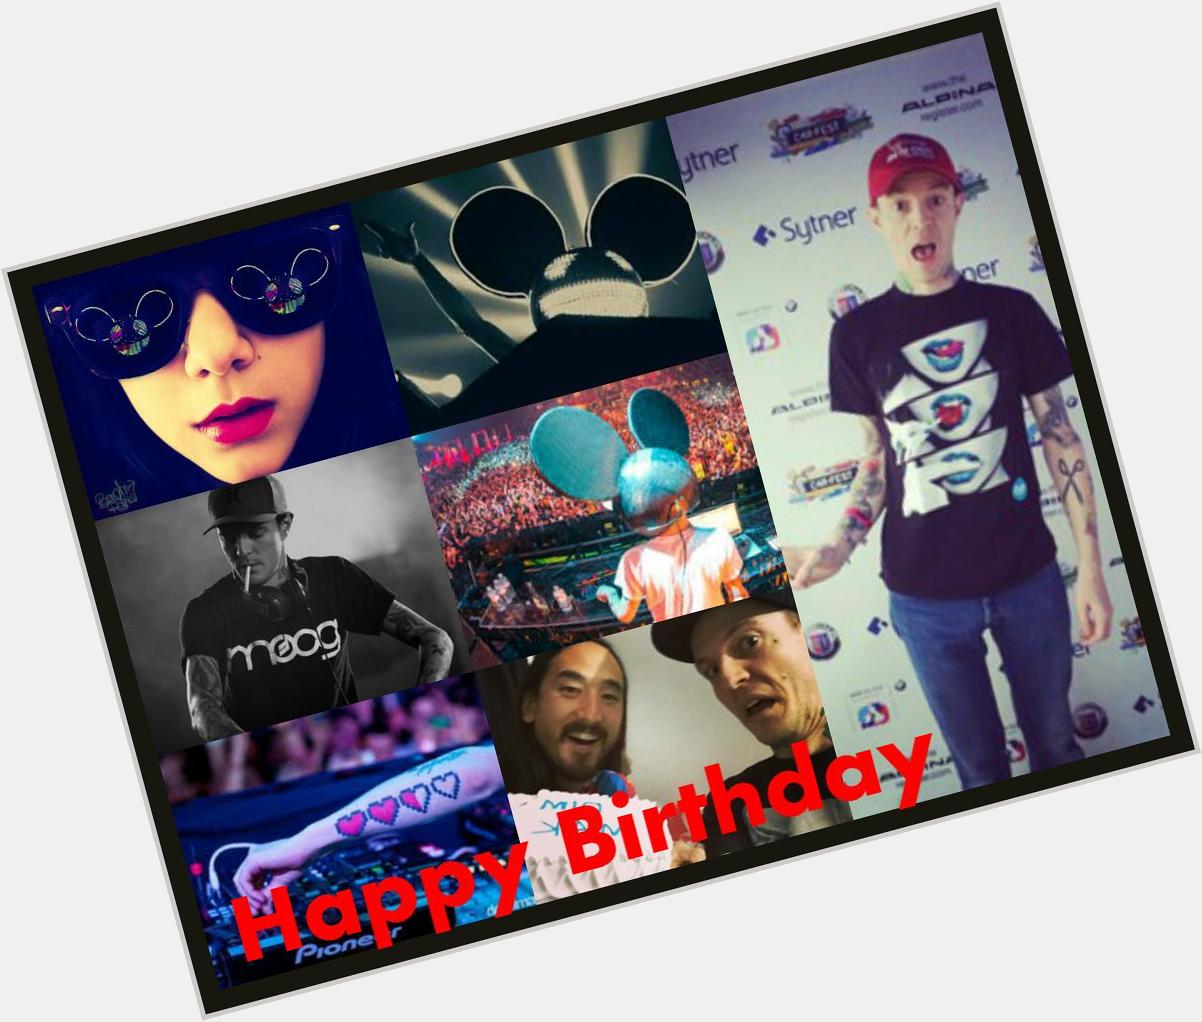  Happy birthday best wishes I hope you enjoy & photo you the best passes Follow delighting your music    